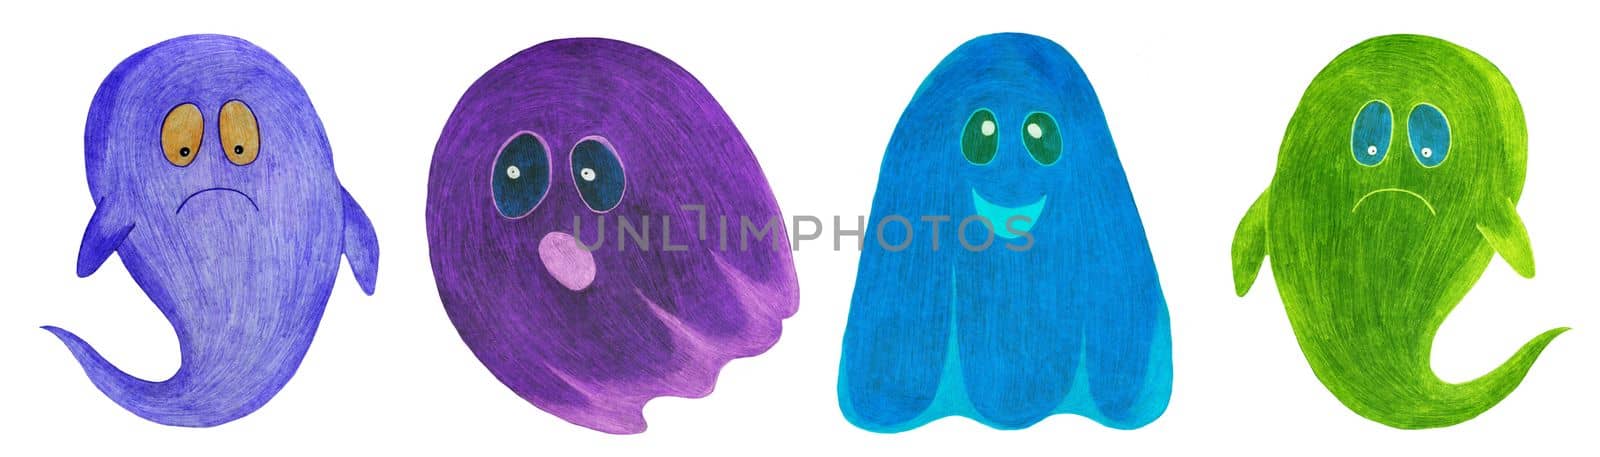 Set of Hand Drawn Halloween Ghosts Isolated on White Background. Halloween scary ghostly monsters. Cute cartoon spooky character, Drawn by Color Pencils.